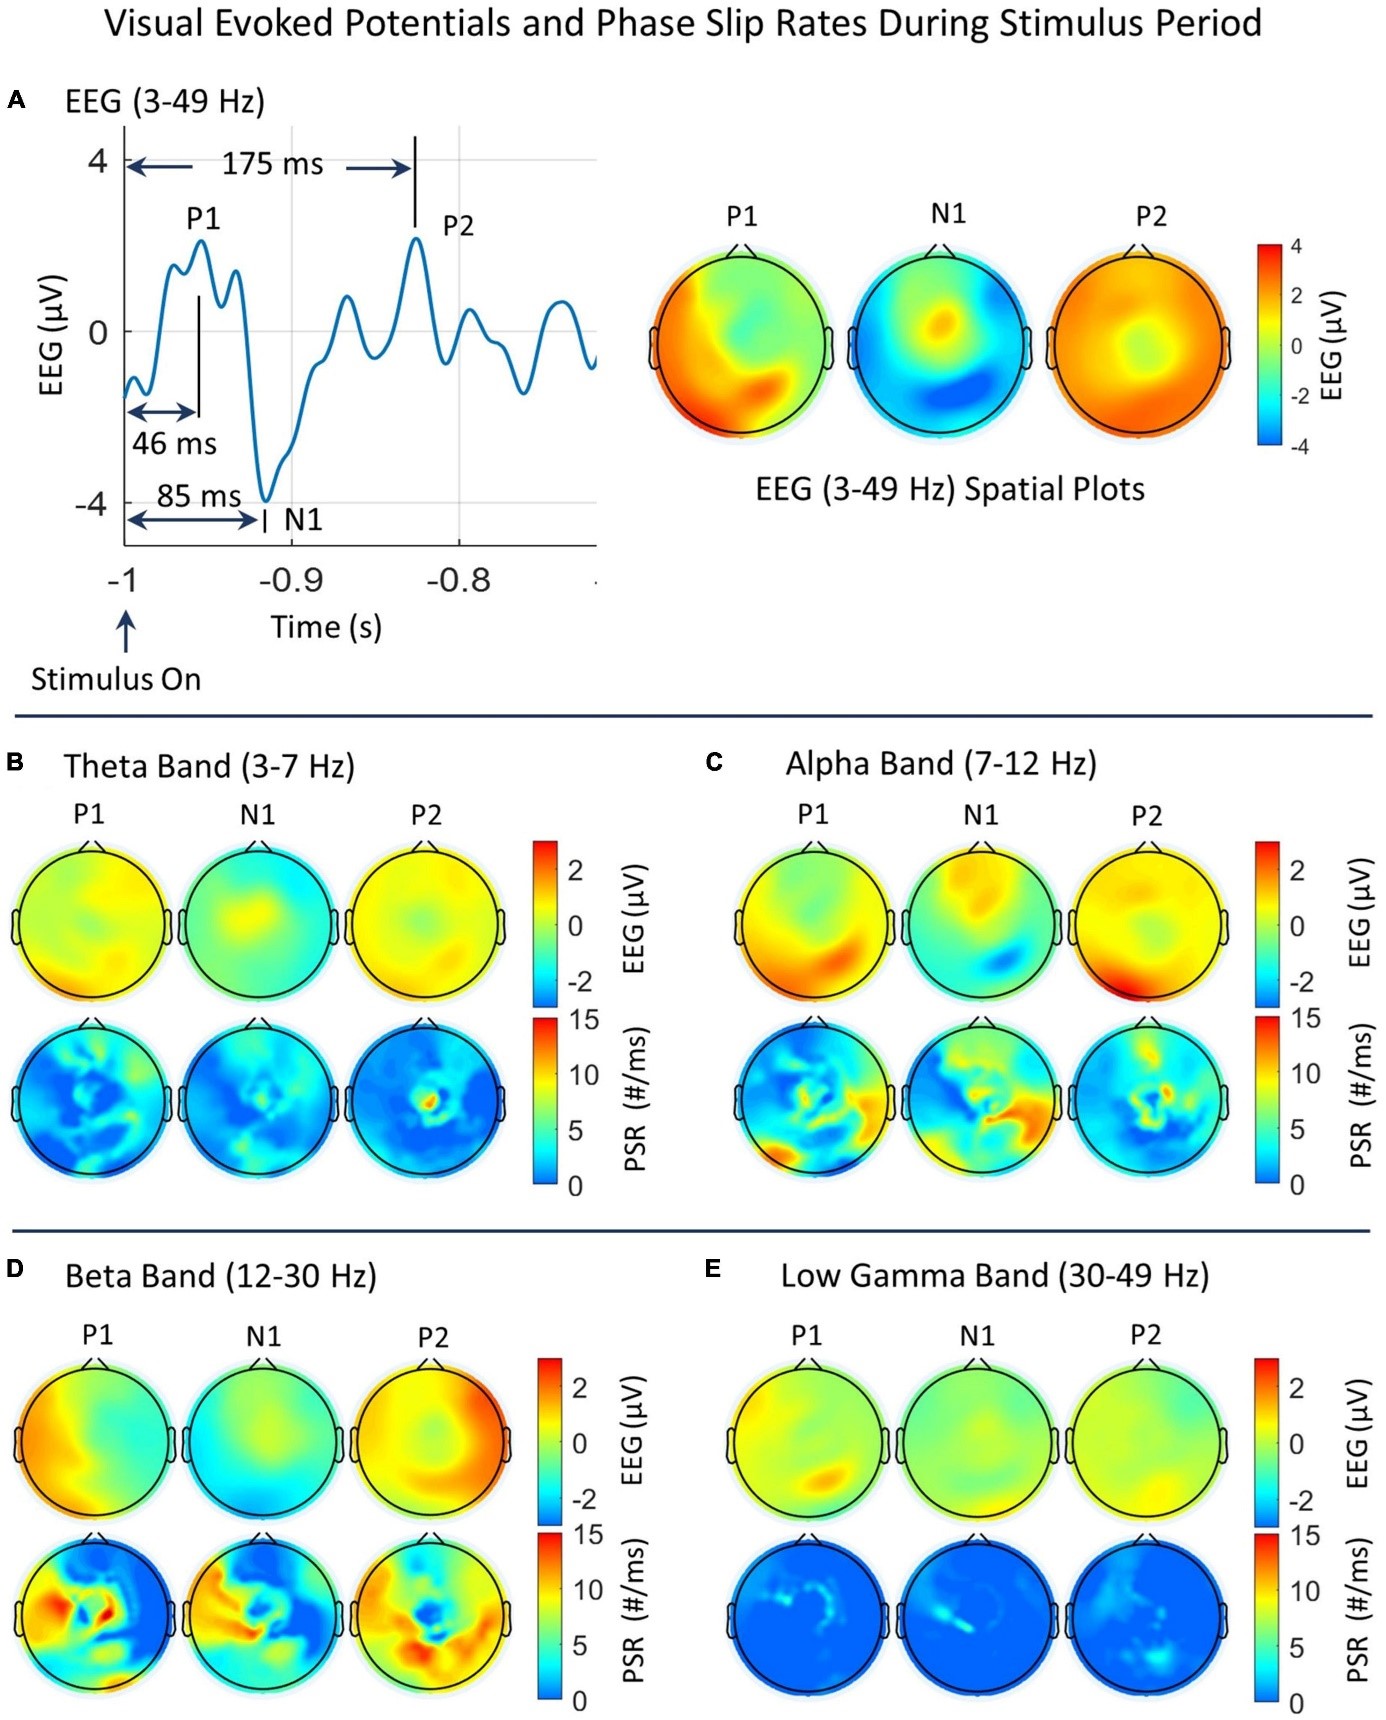 Visual Evoked Potentials an Phase Slip Rates During Stimulus Period